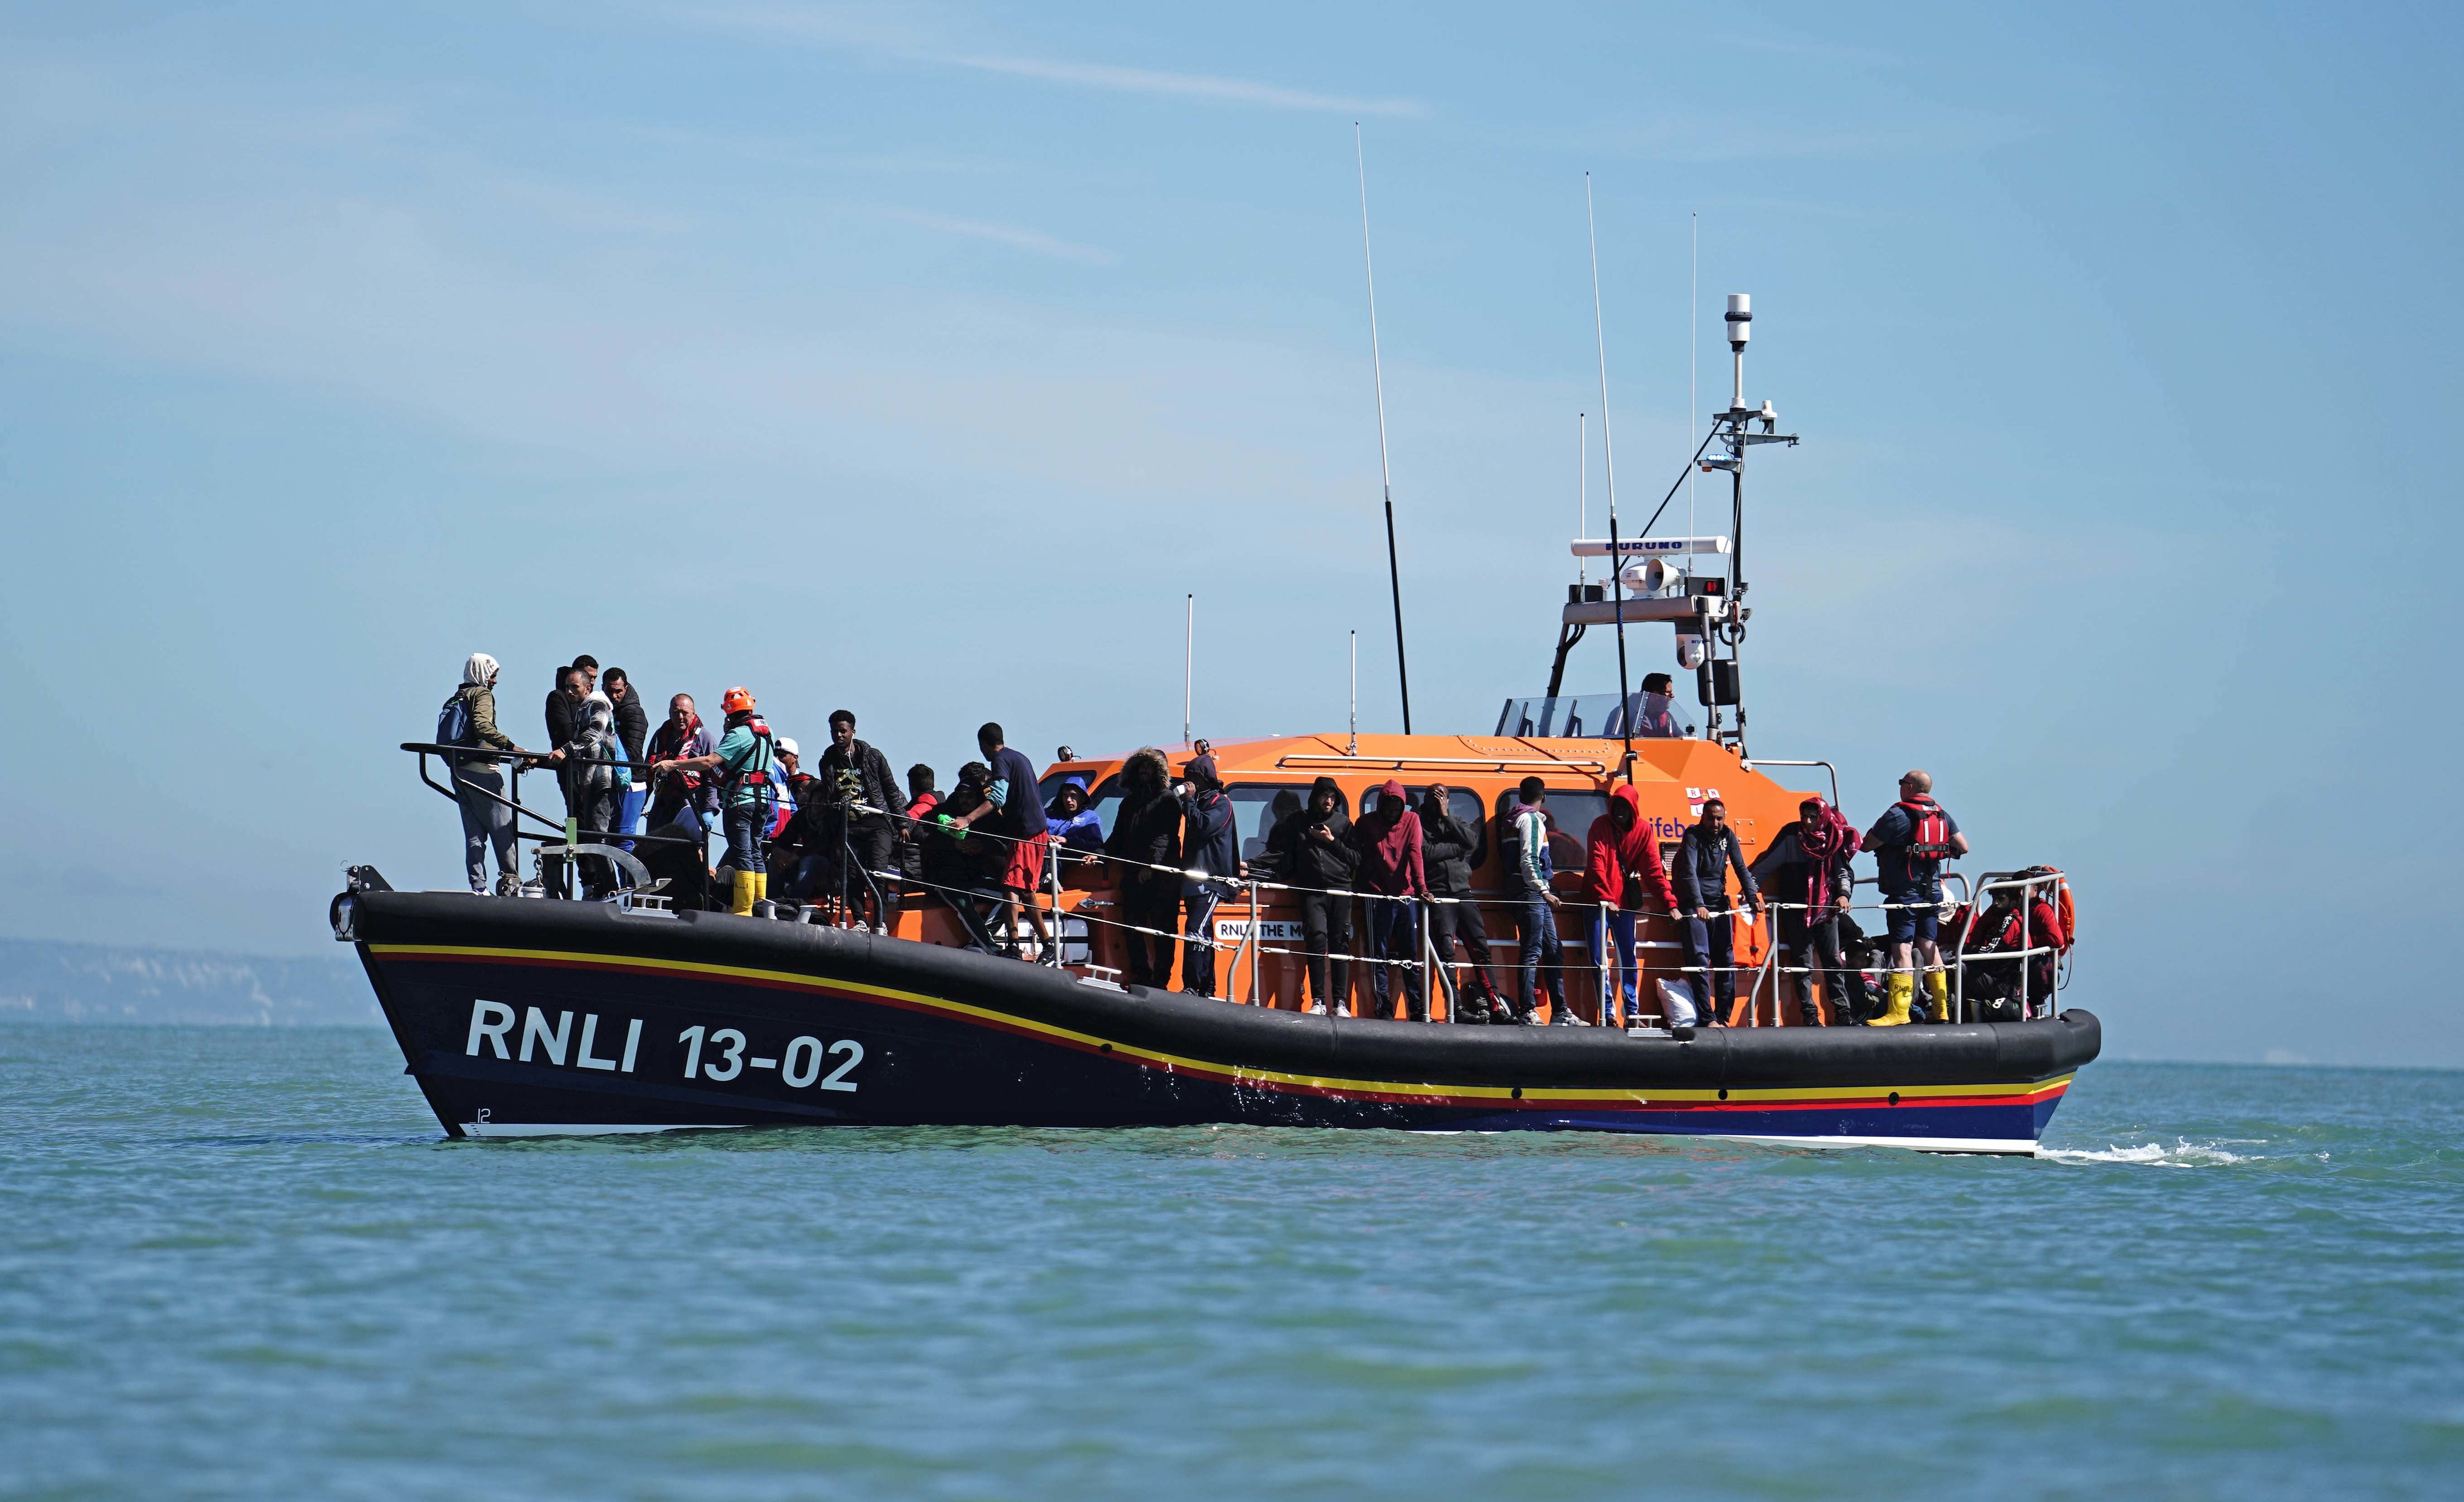 Since Rishi Sunak’s pledge, in March 2023, that anyone who crossed the Channel would be removed within weeks, 50,000 asylum-seekers have arrived in the UK